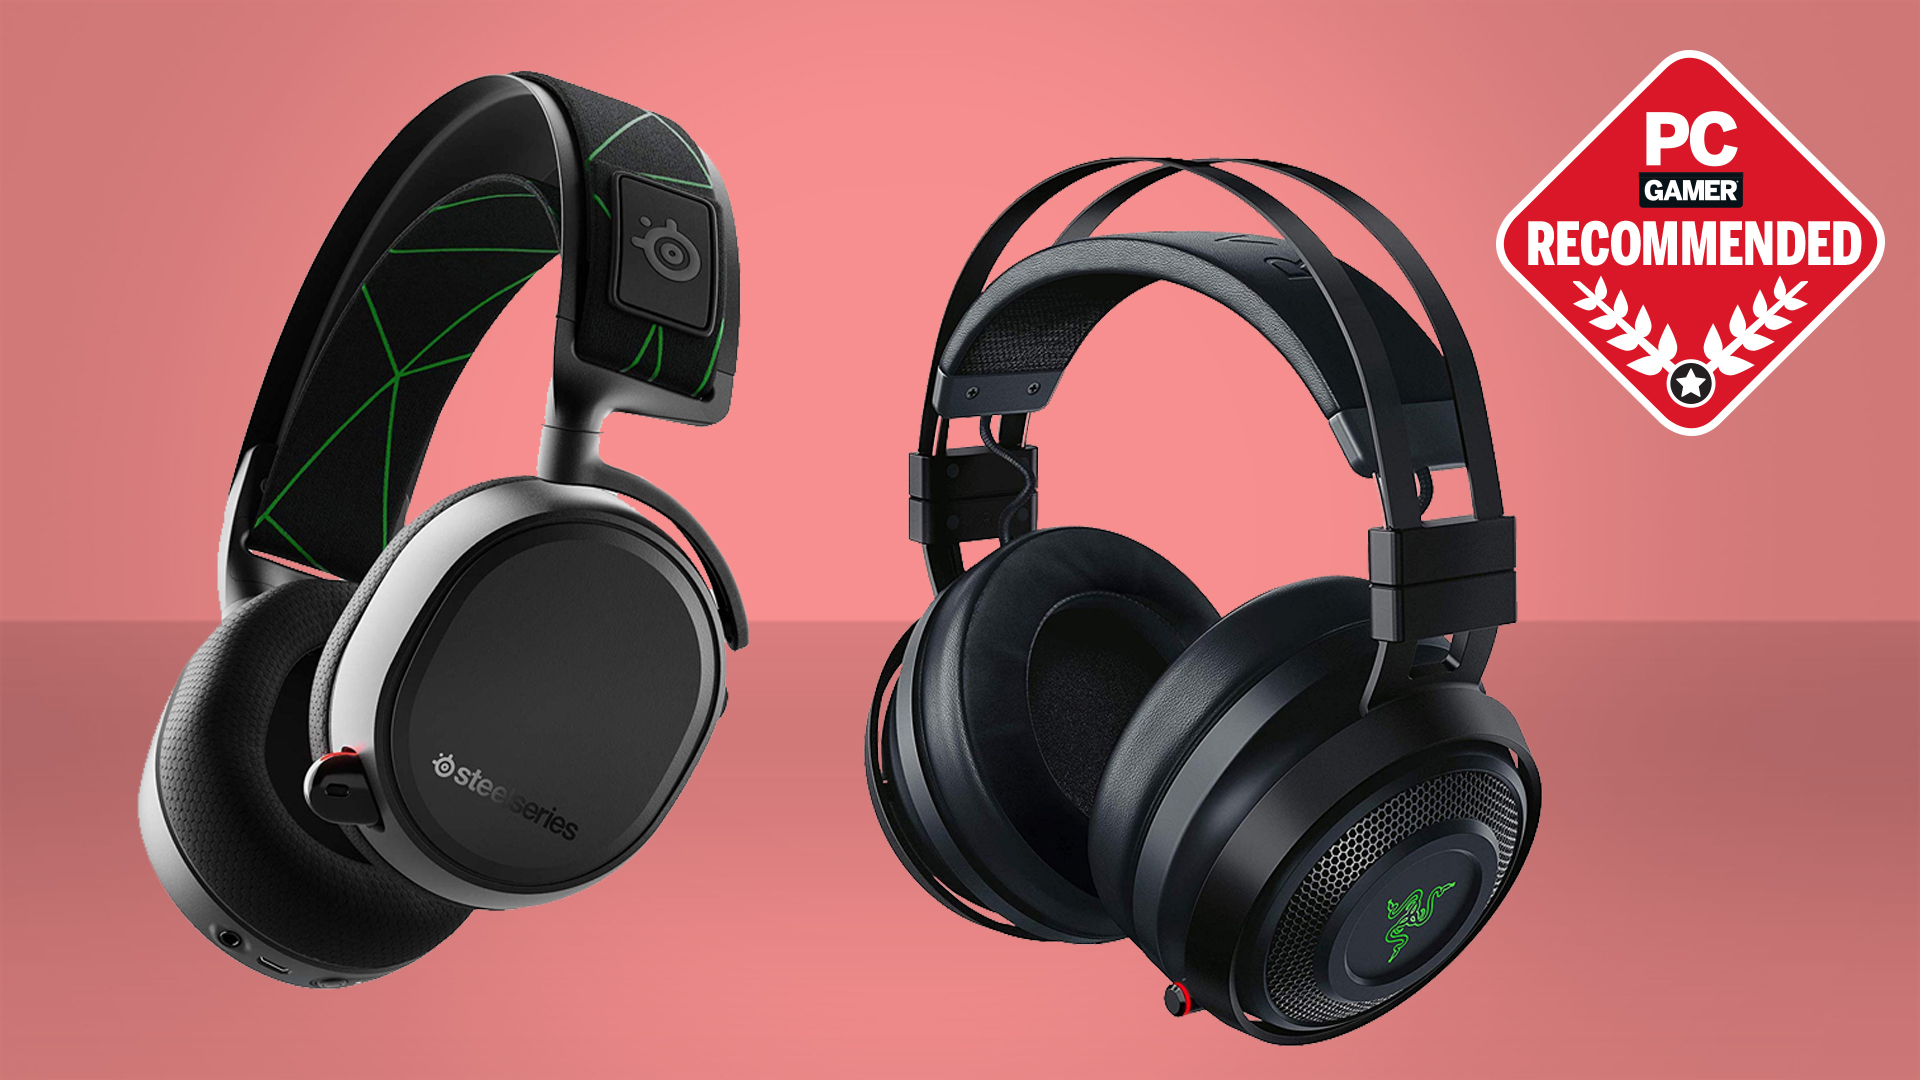 The best gaming headsets in 2021 | PC Gamer